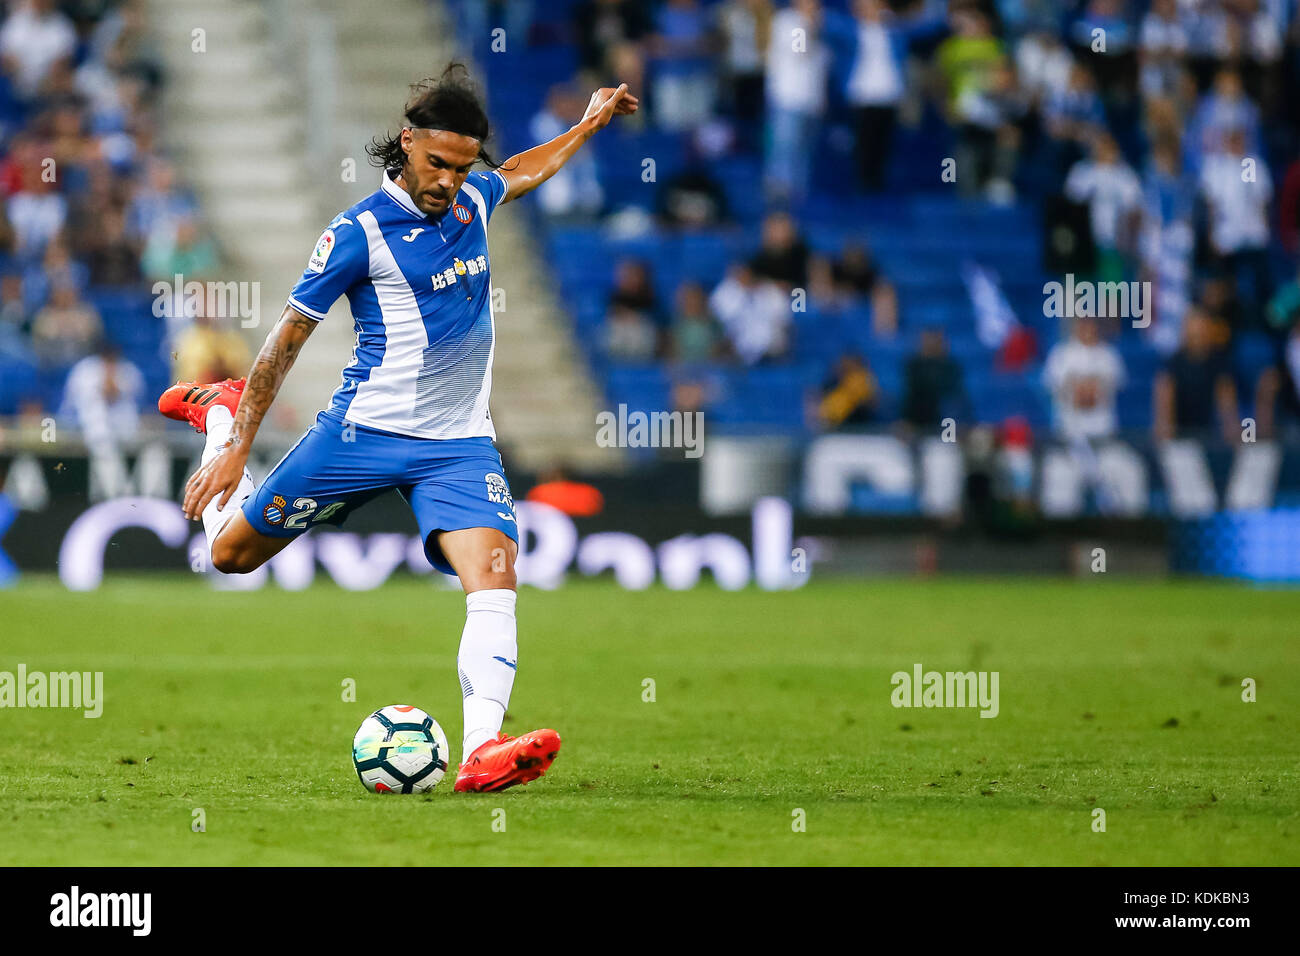 SPAIN - 13th of October: Sergio Sanchez during the match between RCD  Espanyol against Levante UD, for the round 8 of the Liga Santander, played  at RCDE Stadium on 13th October 2017